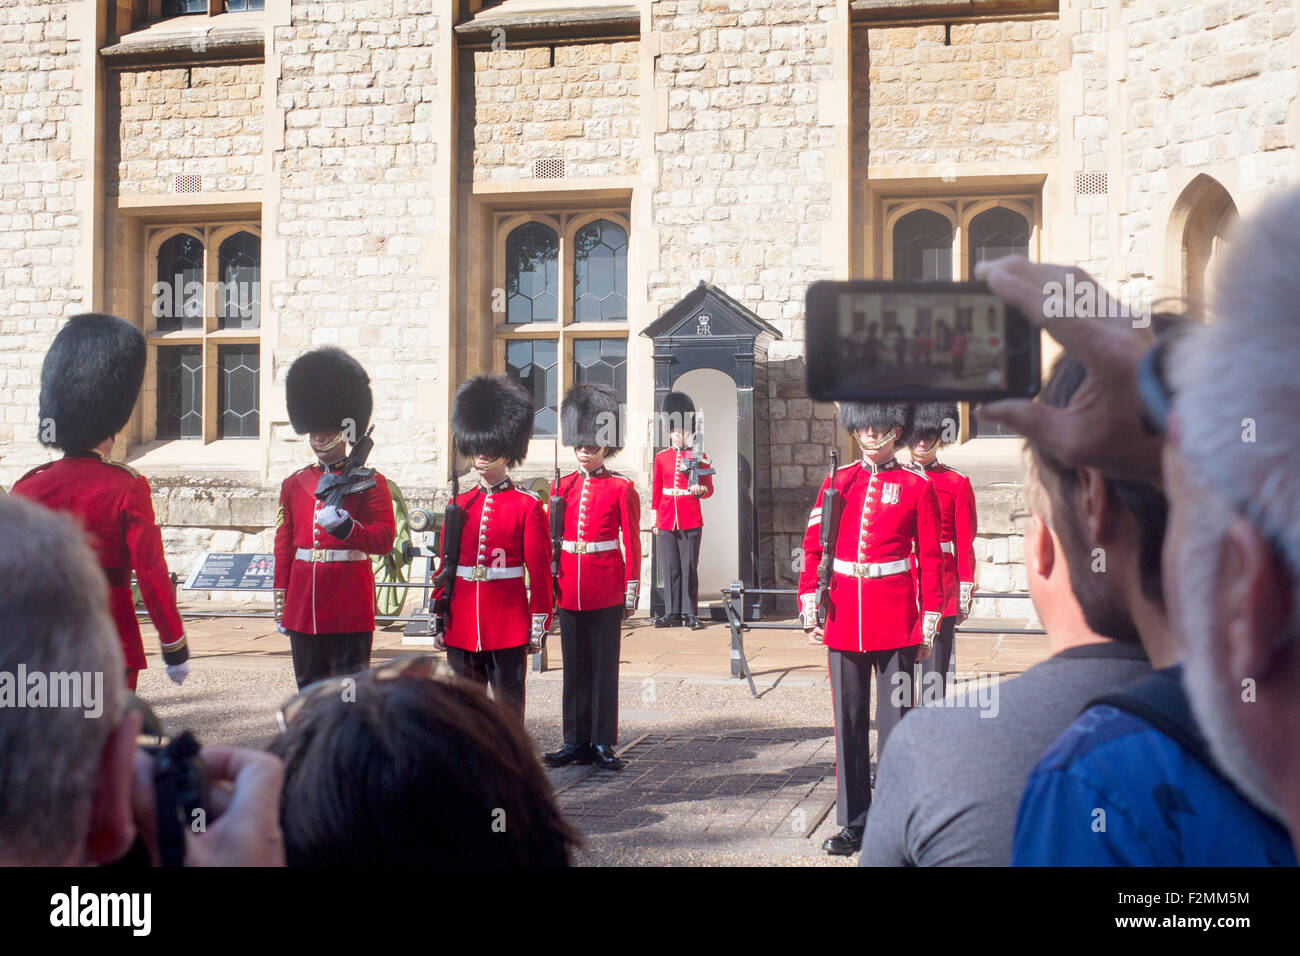 Ceremony of the Word with spectators tourists watching and filming Tower of London City of London England UK Stock Photo